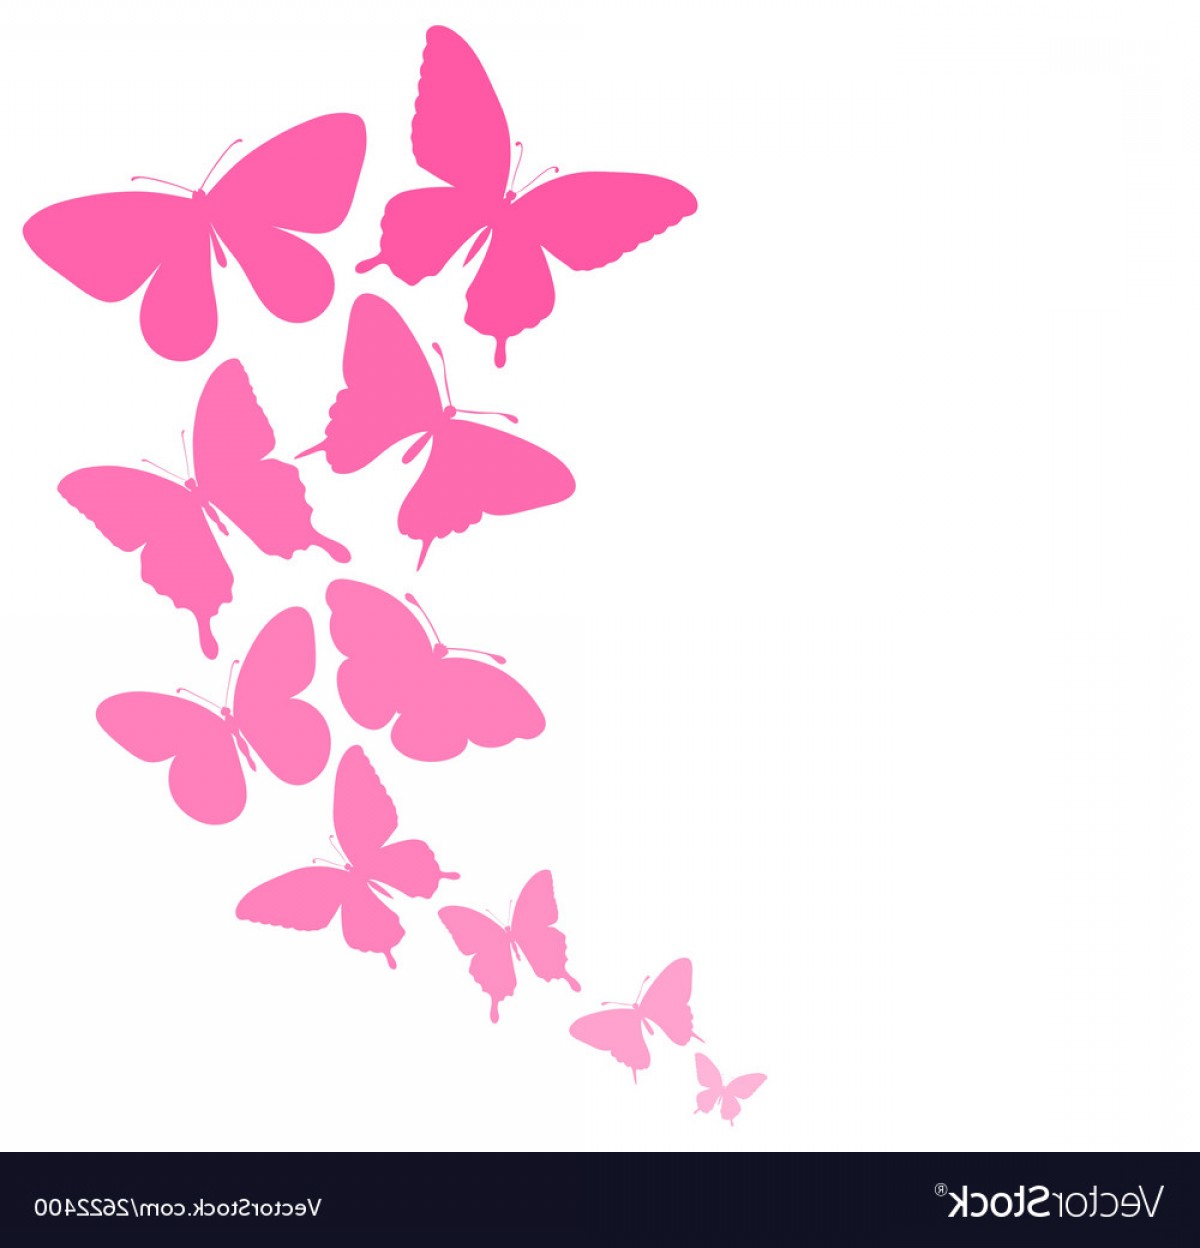 Download Butterfly Border Vector at Vectorified.com | Collection of ...